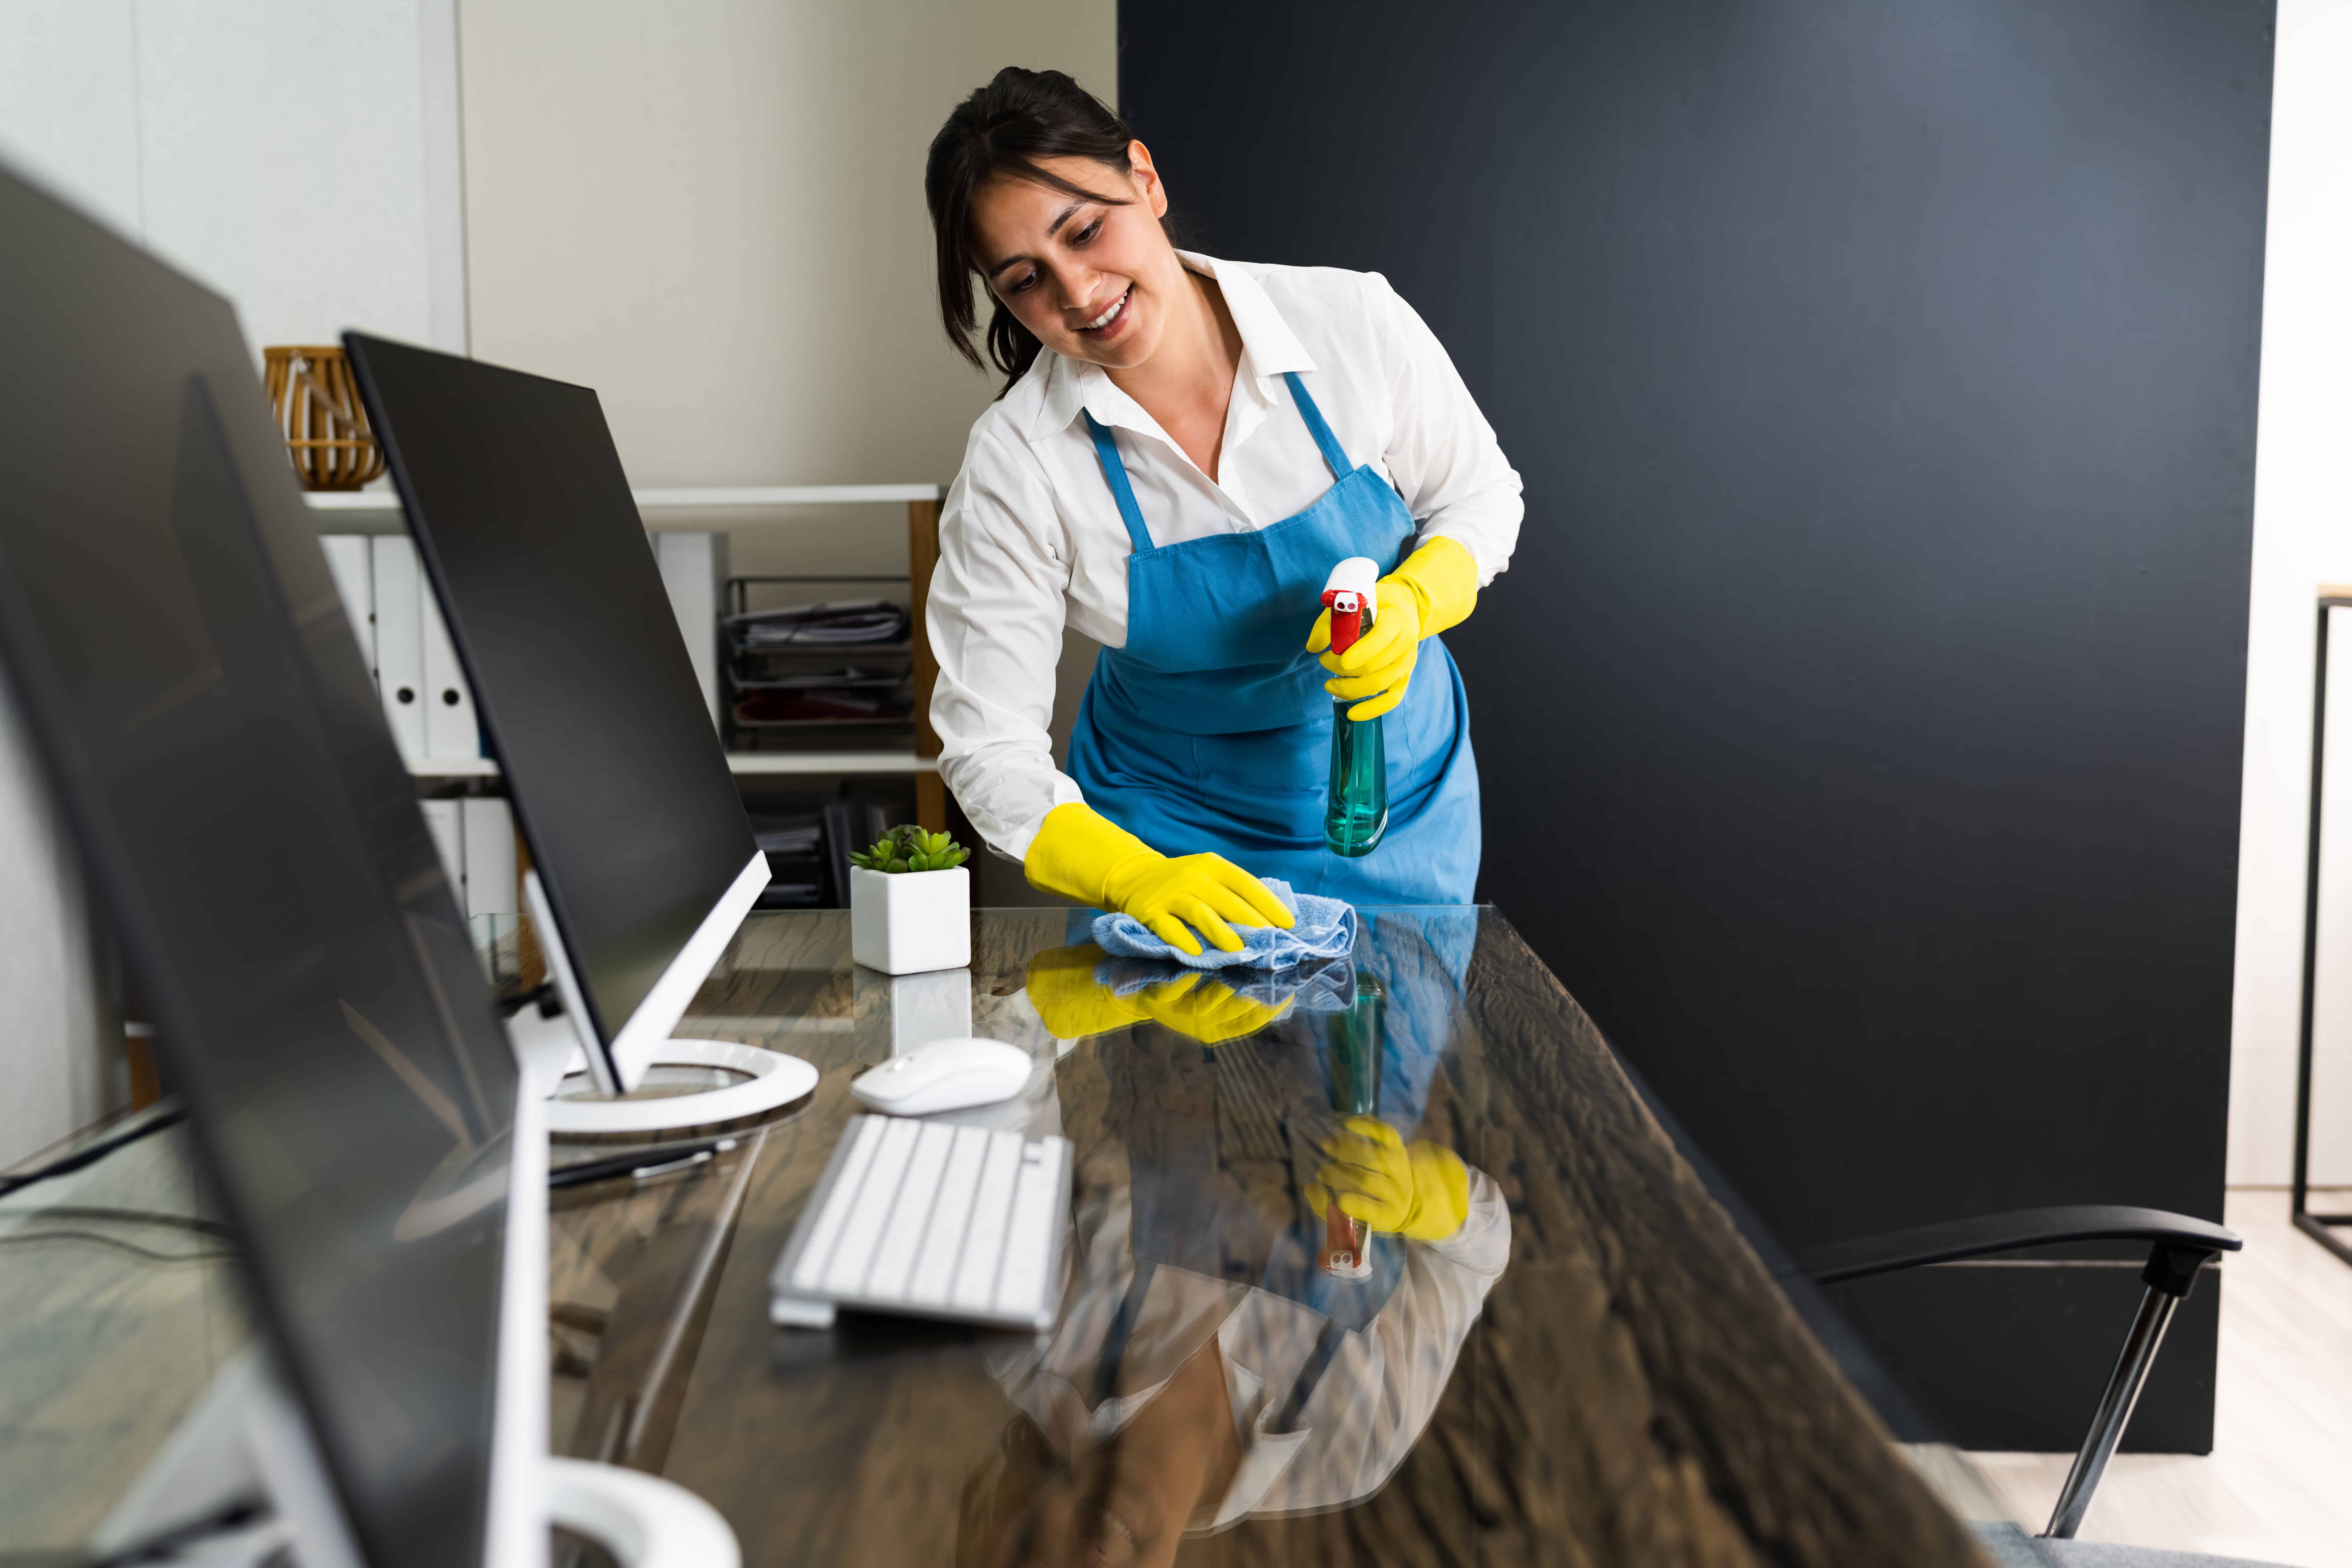 Professional cleaning company wiping down and sanitizing office desks